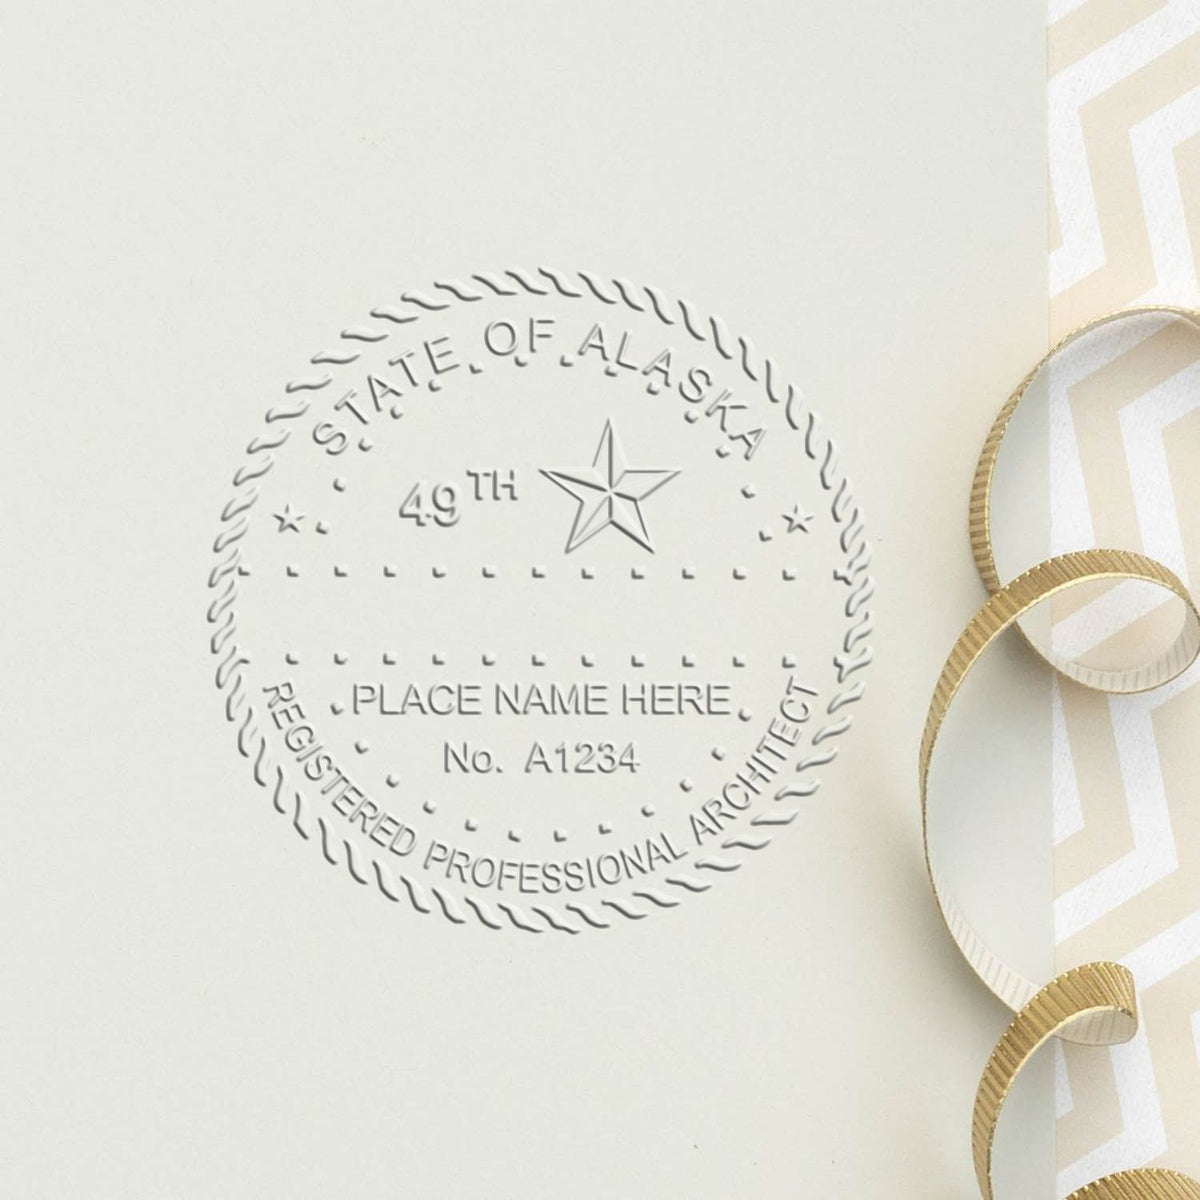 A stamped imprint of the Gift Alaska Architect Seal in this stylish lifestyle photo, setting the tone for a unique and personalized product.